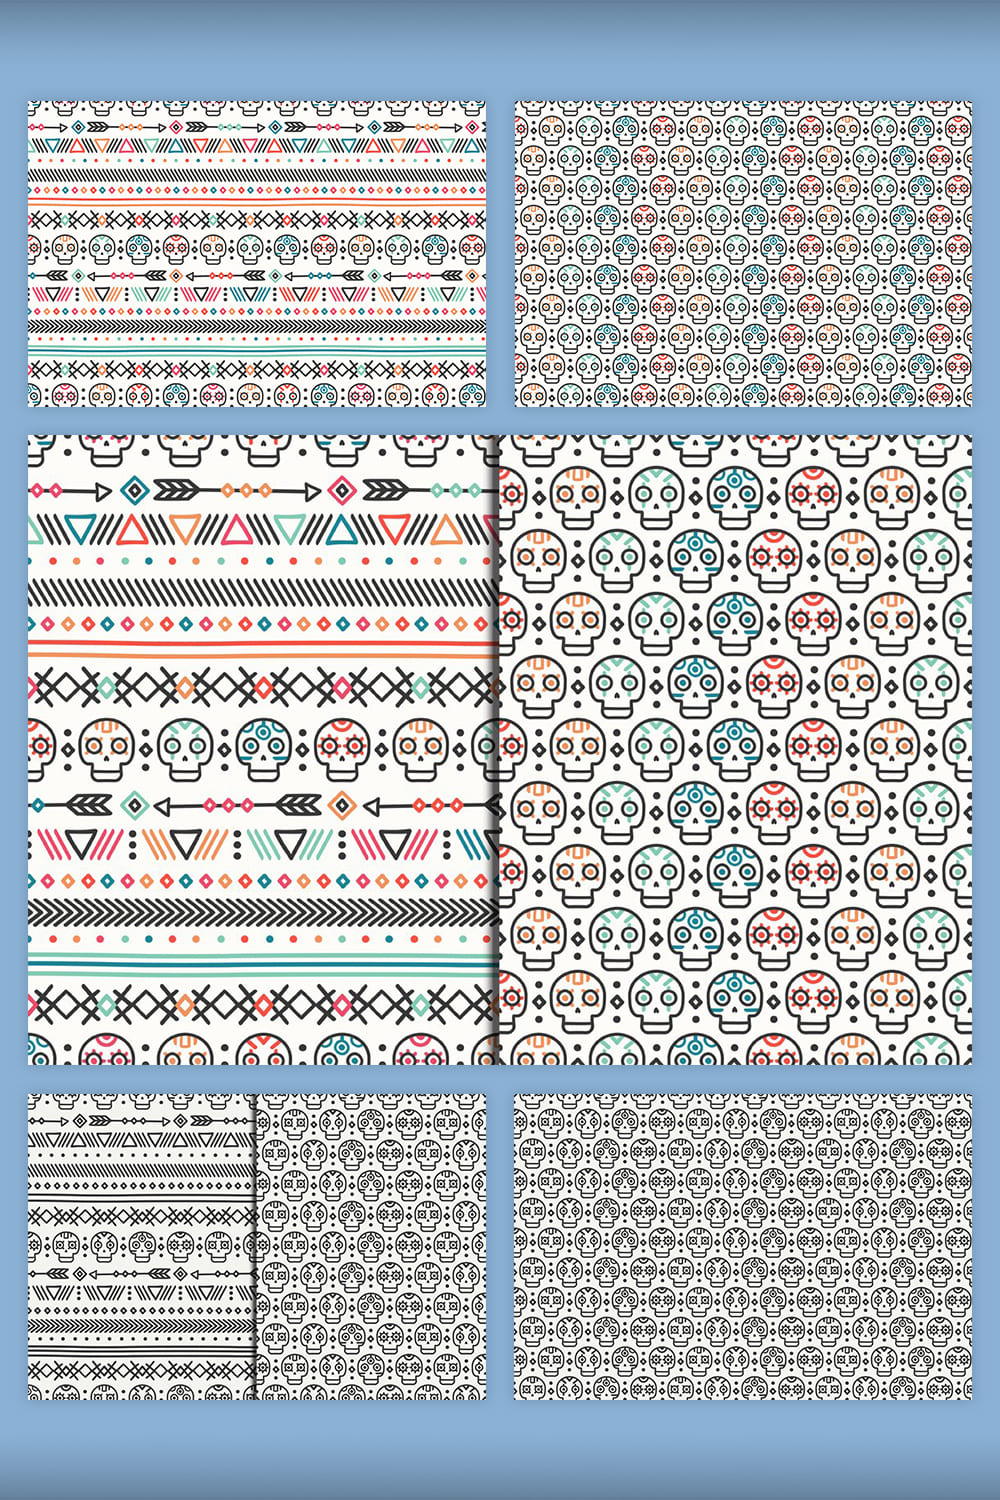 day of the dead pattern with skulls for paper design.